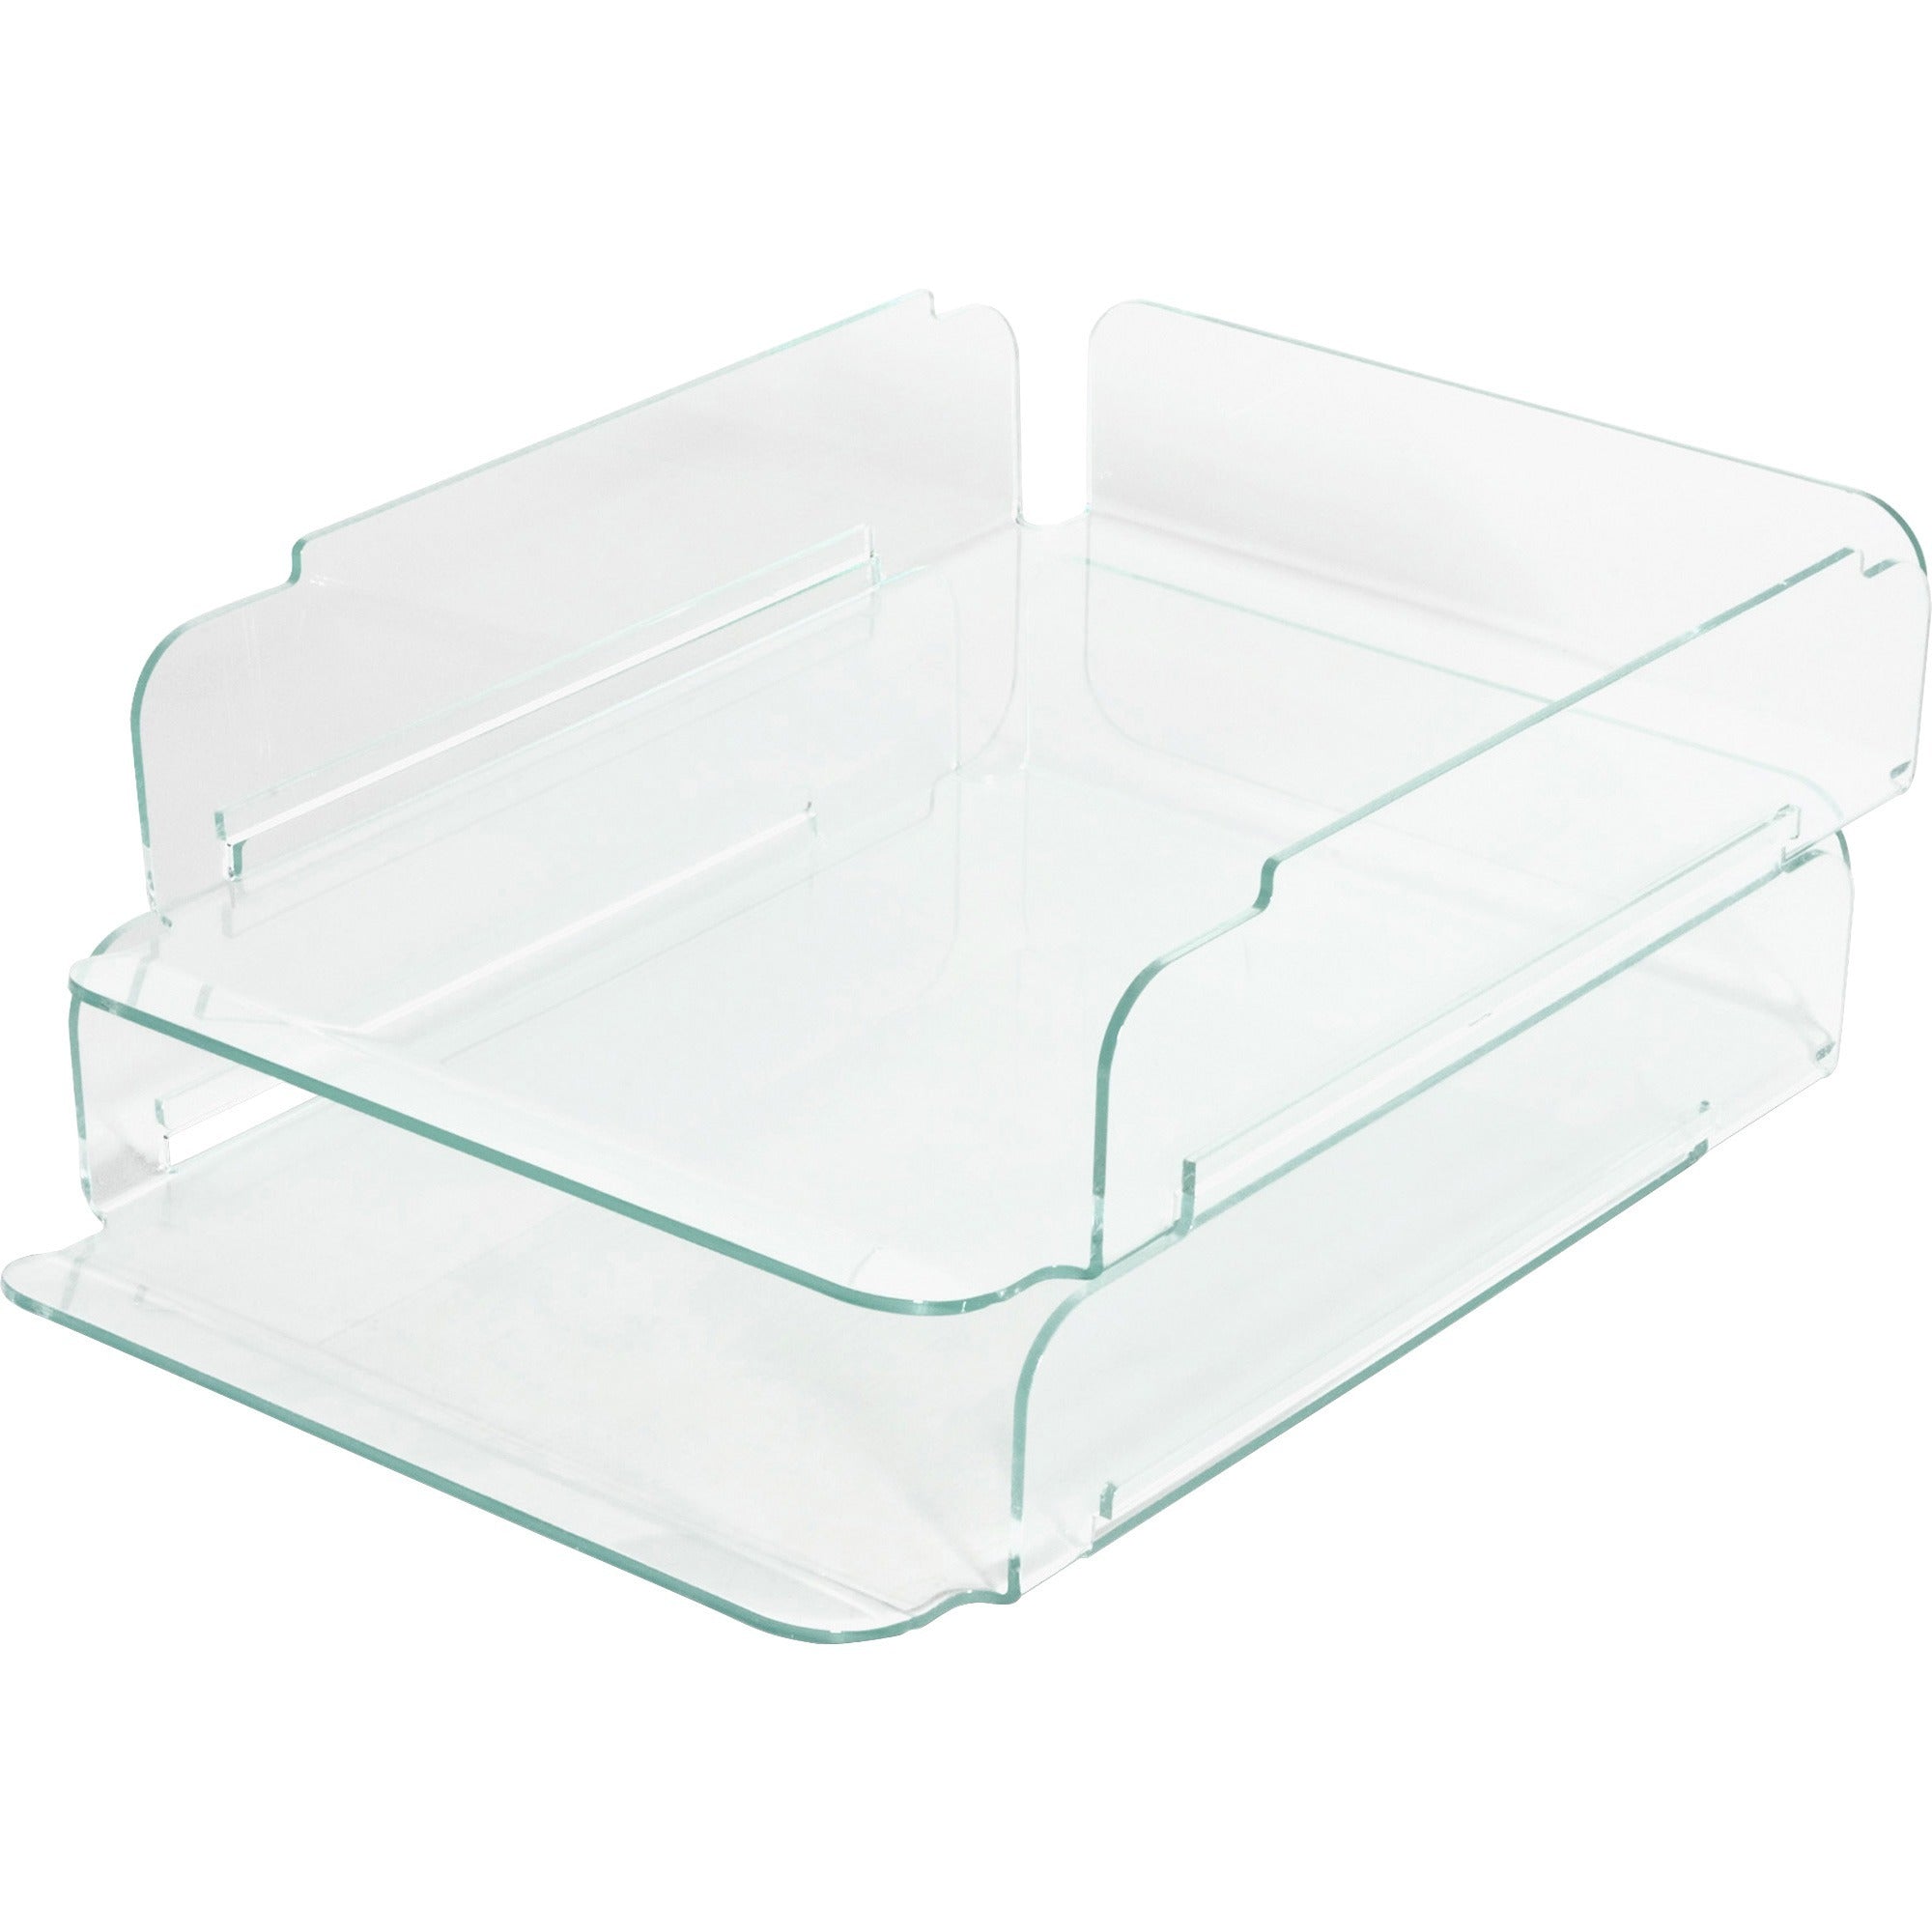 Lorell Stacking Document Trays - Desktop - Durable, Lightweight, Non-skid, Stackable - Clear - Acrylic - 1 Each - 